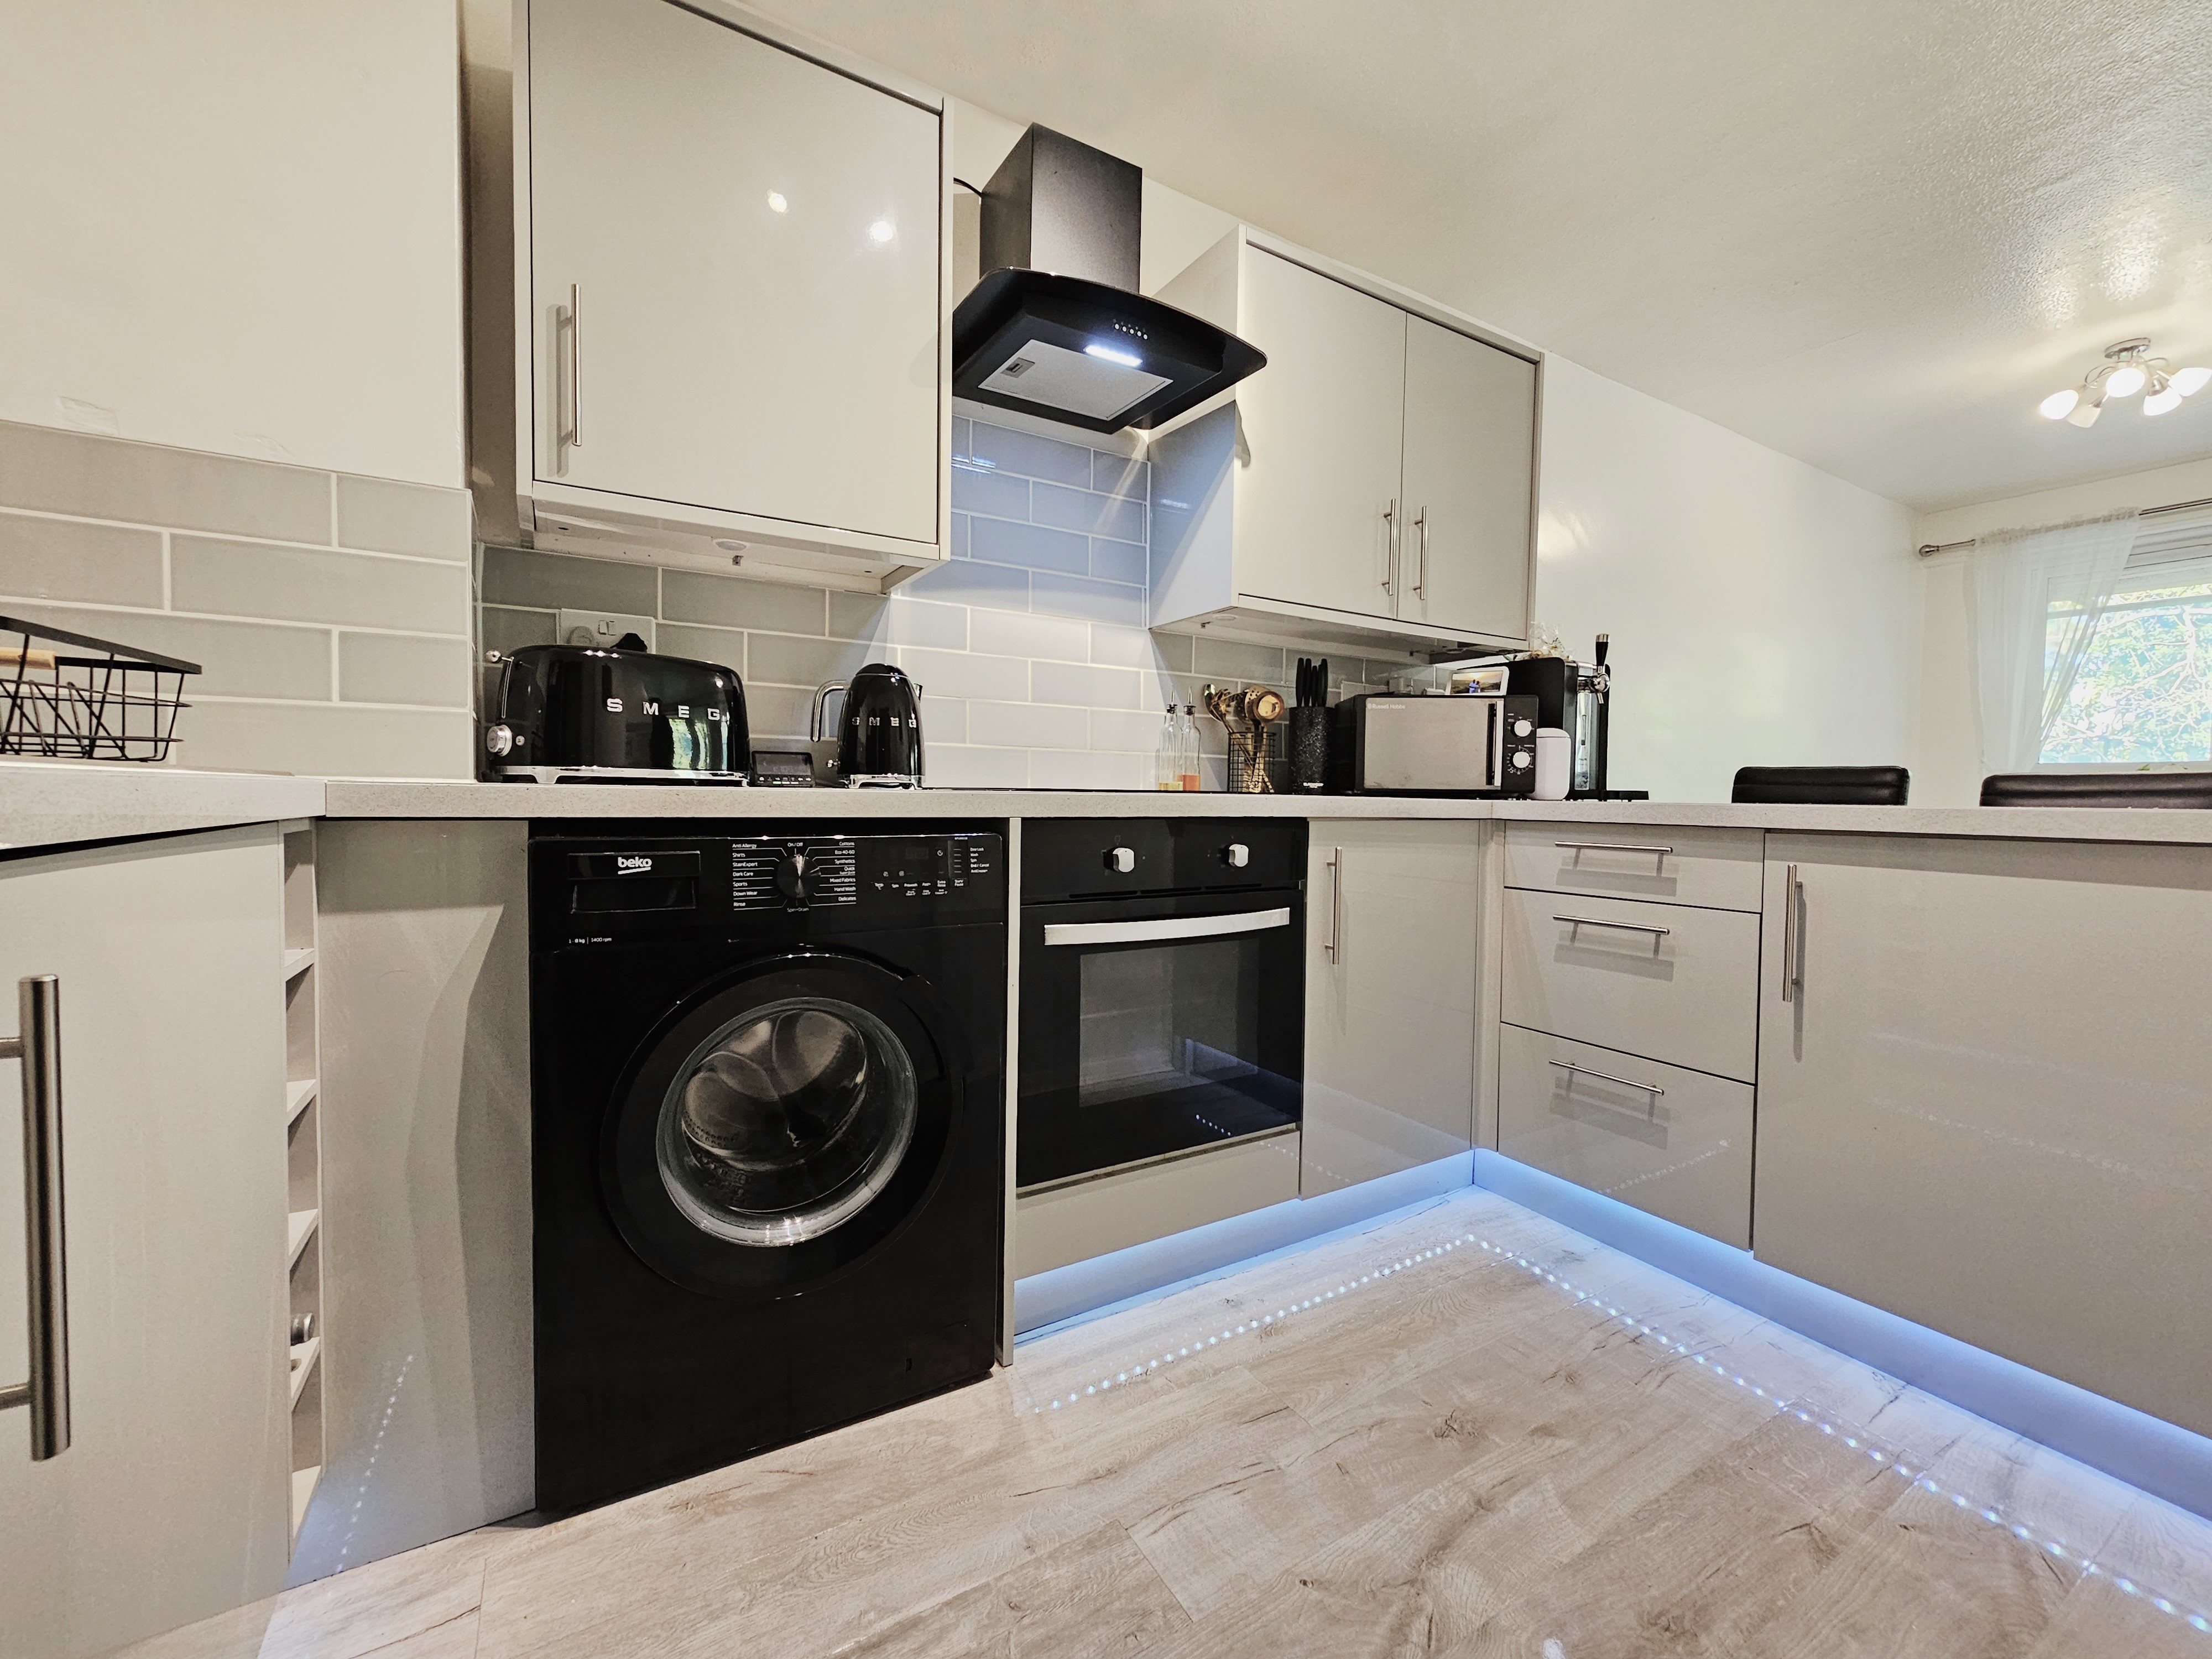 2 bed flat for sale in Rayleigh, Essex - Property Image 1